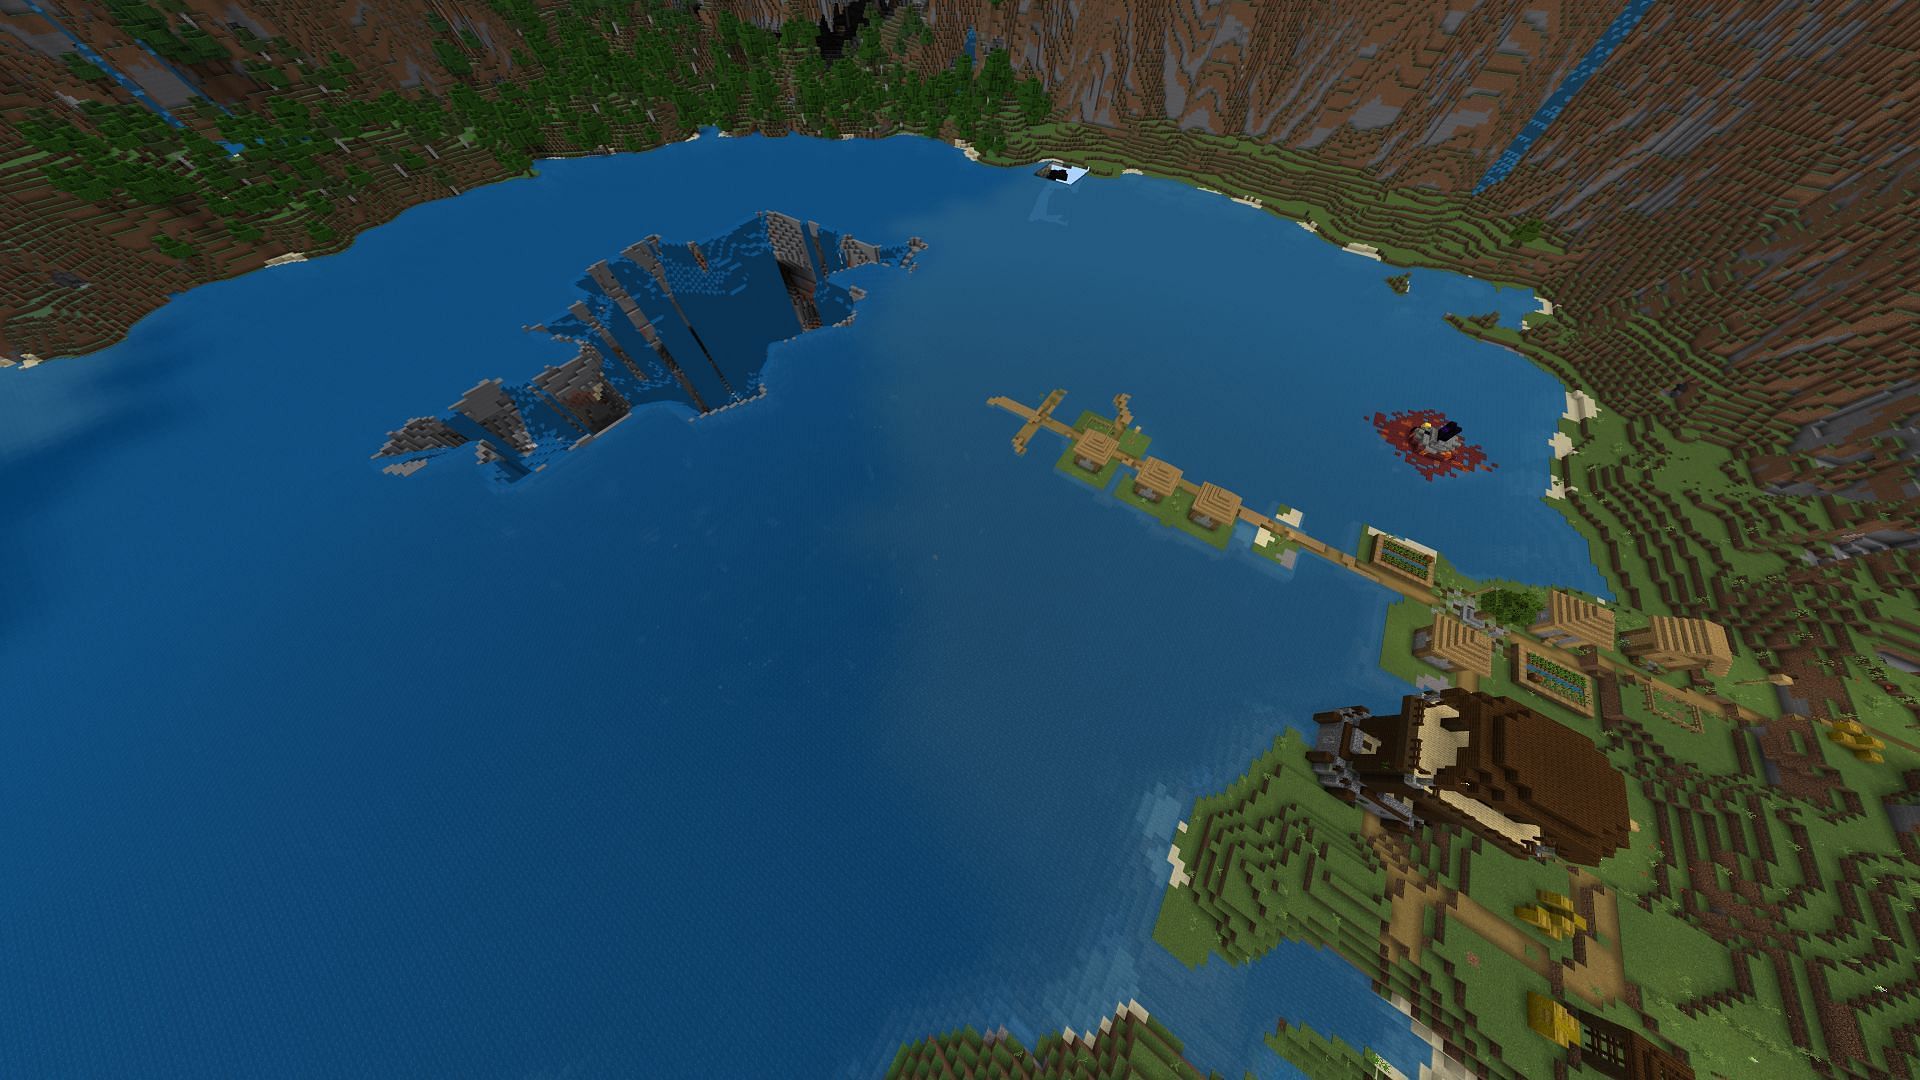 Fans might run into trouble well before they reach this seed&#039;s sinkhole (Image via Minecraft &amp; Chill/YouTube)